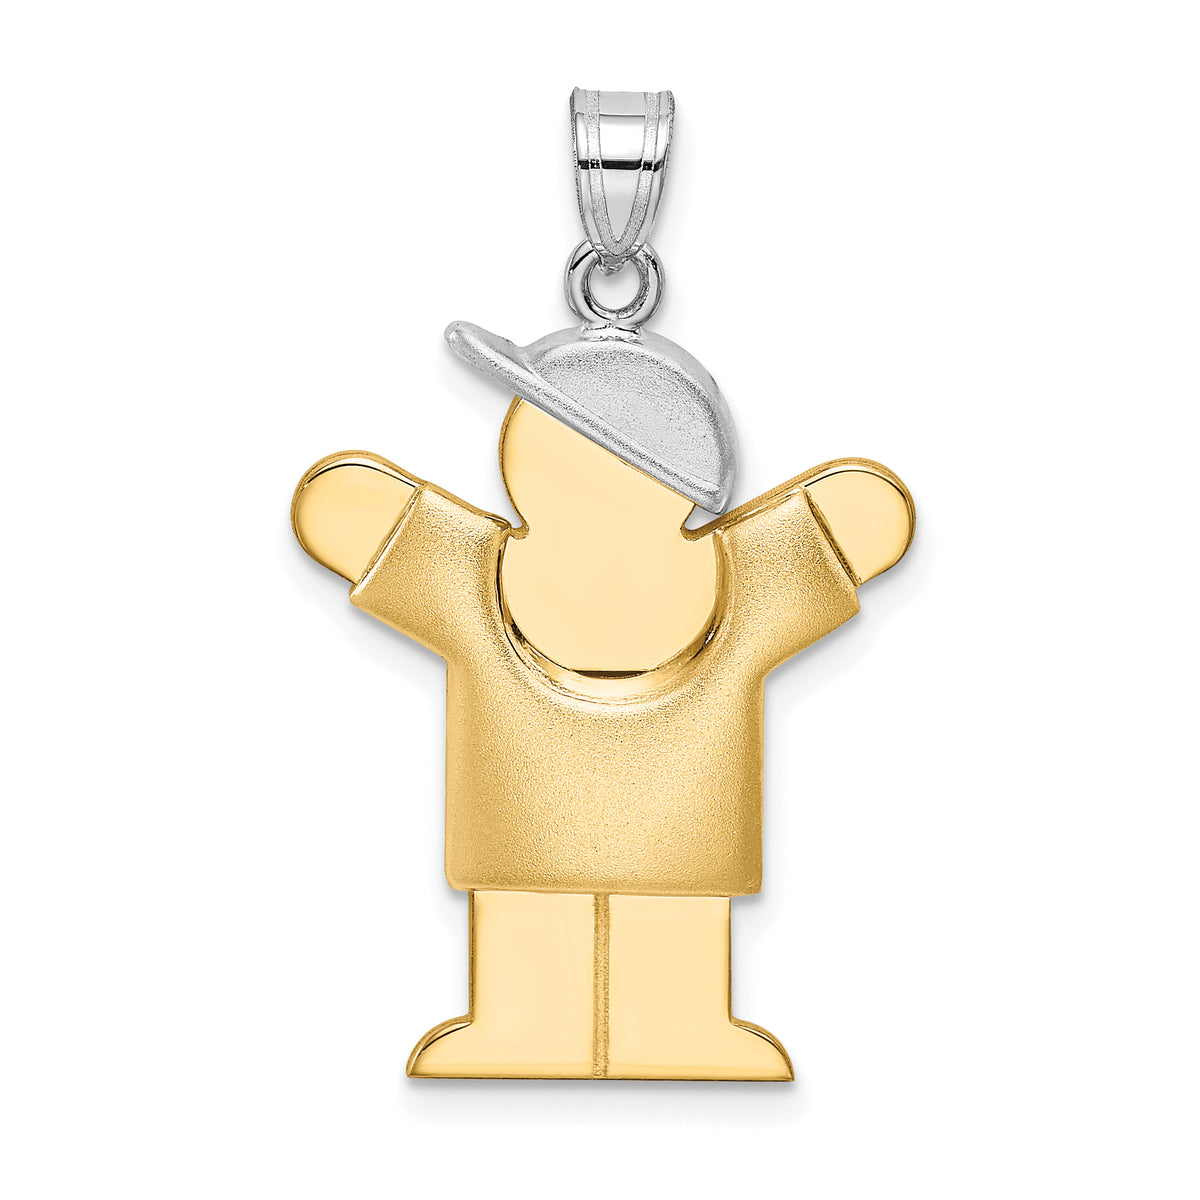 14k Two-Tone Puffed Boy with Hat on Right Engravable Charm